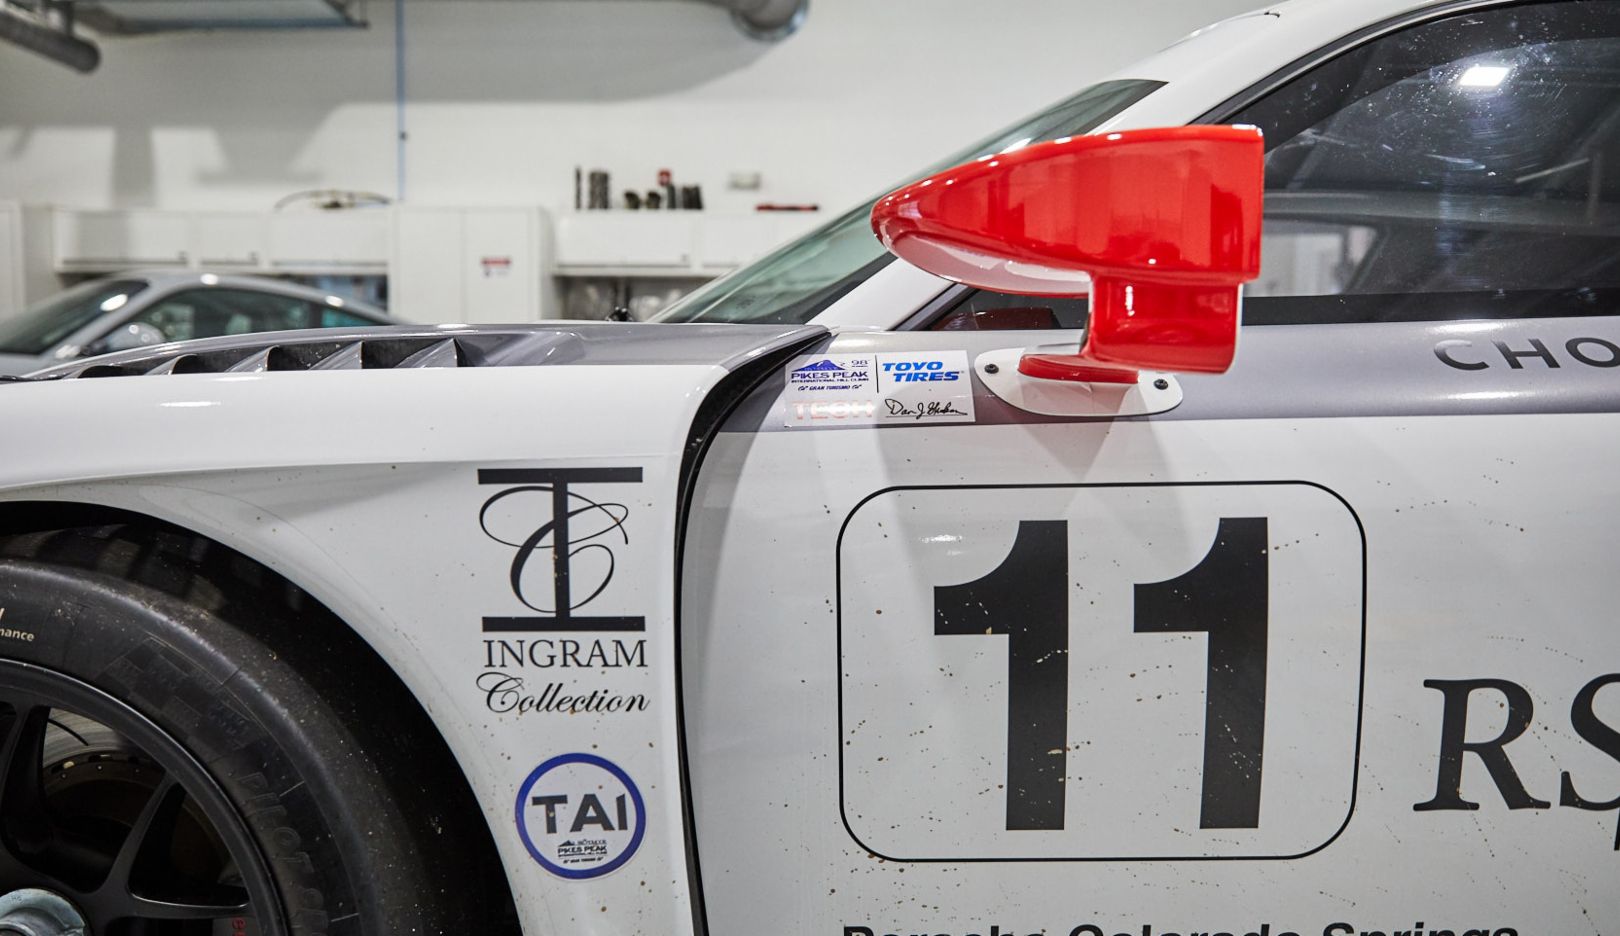 The Porsche 935 took part in the legendary Pikes Peak International Hill Climb in Colorado in August 2020. It still bears the marks.